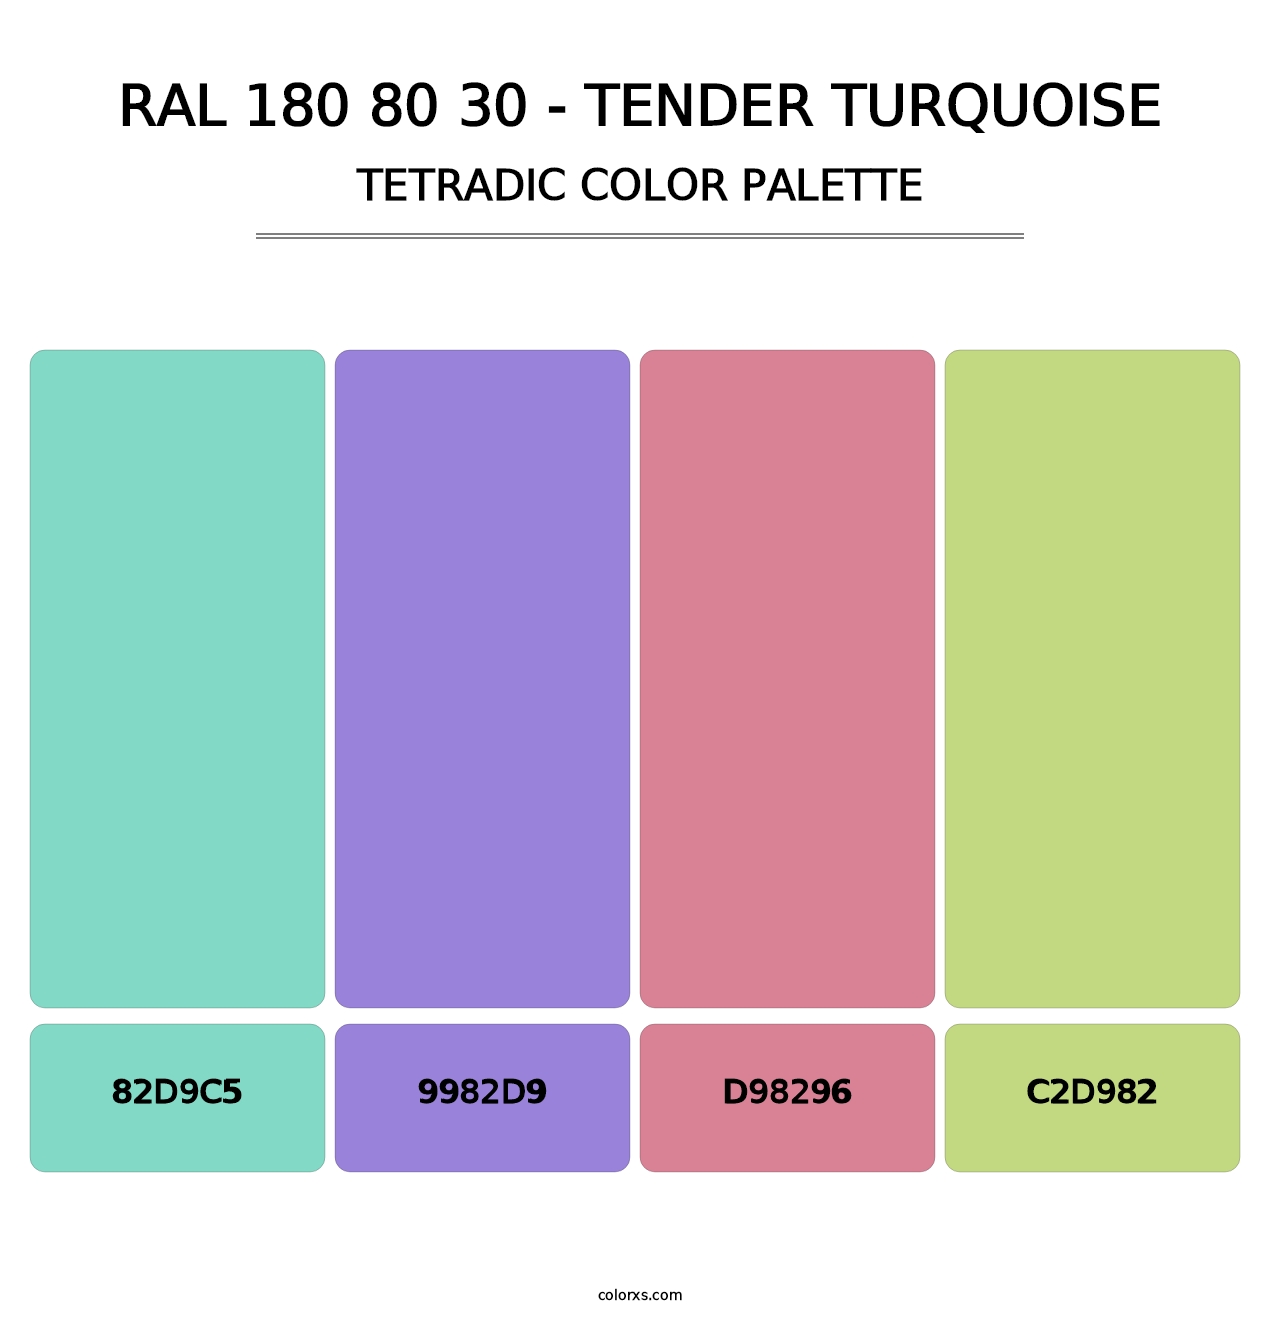 RAL 180 80 30 - Tender Turquoise - Tetradic Color Palette